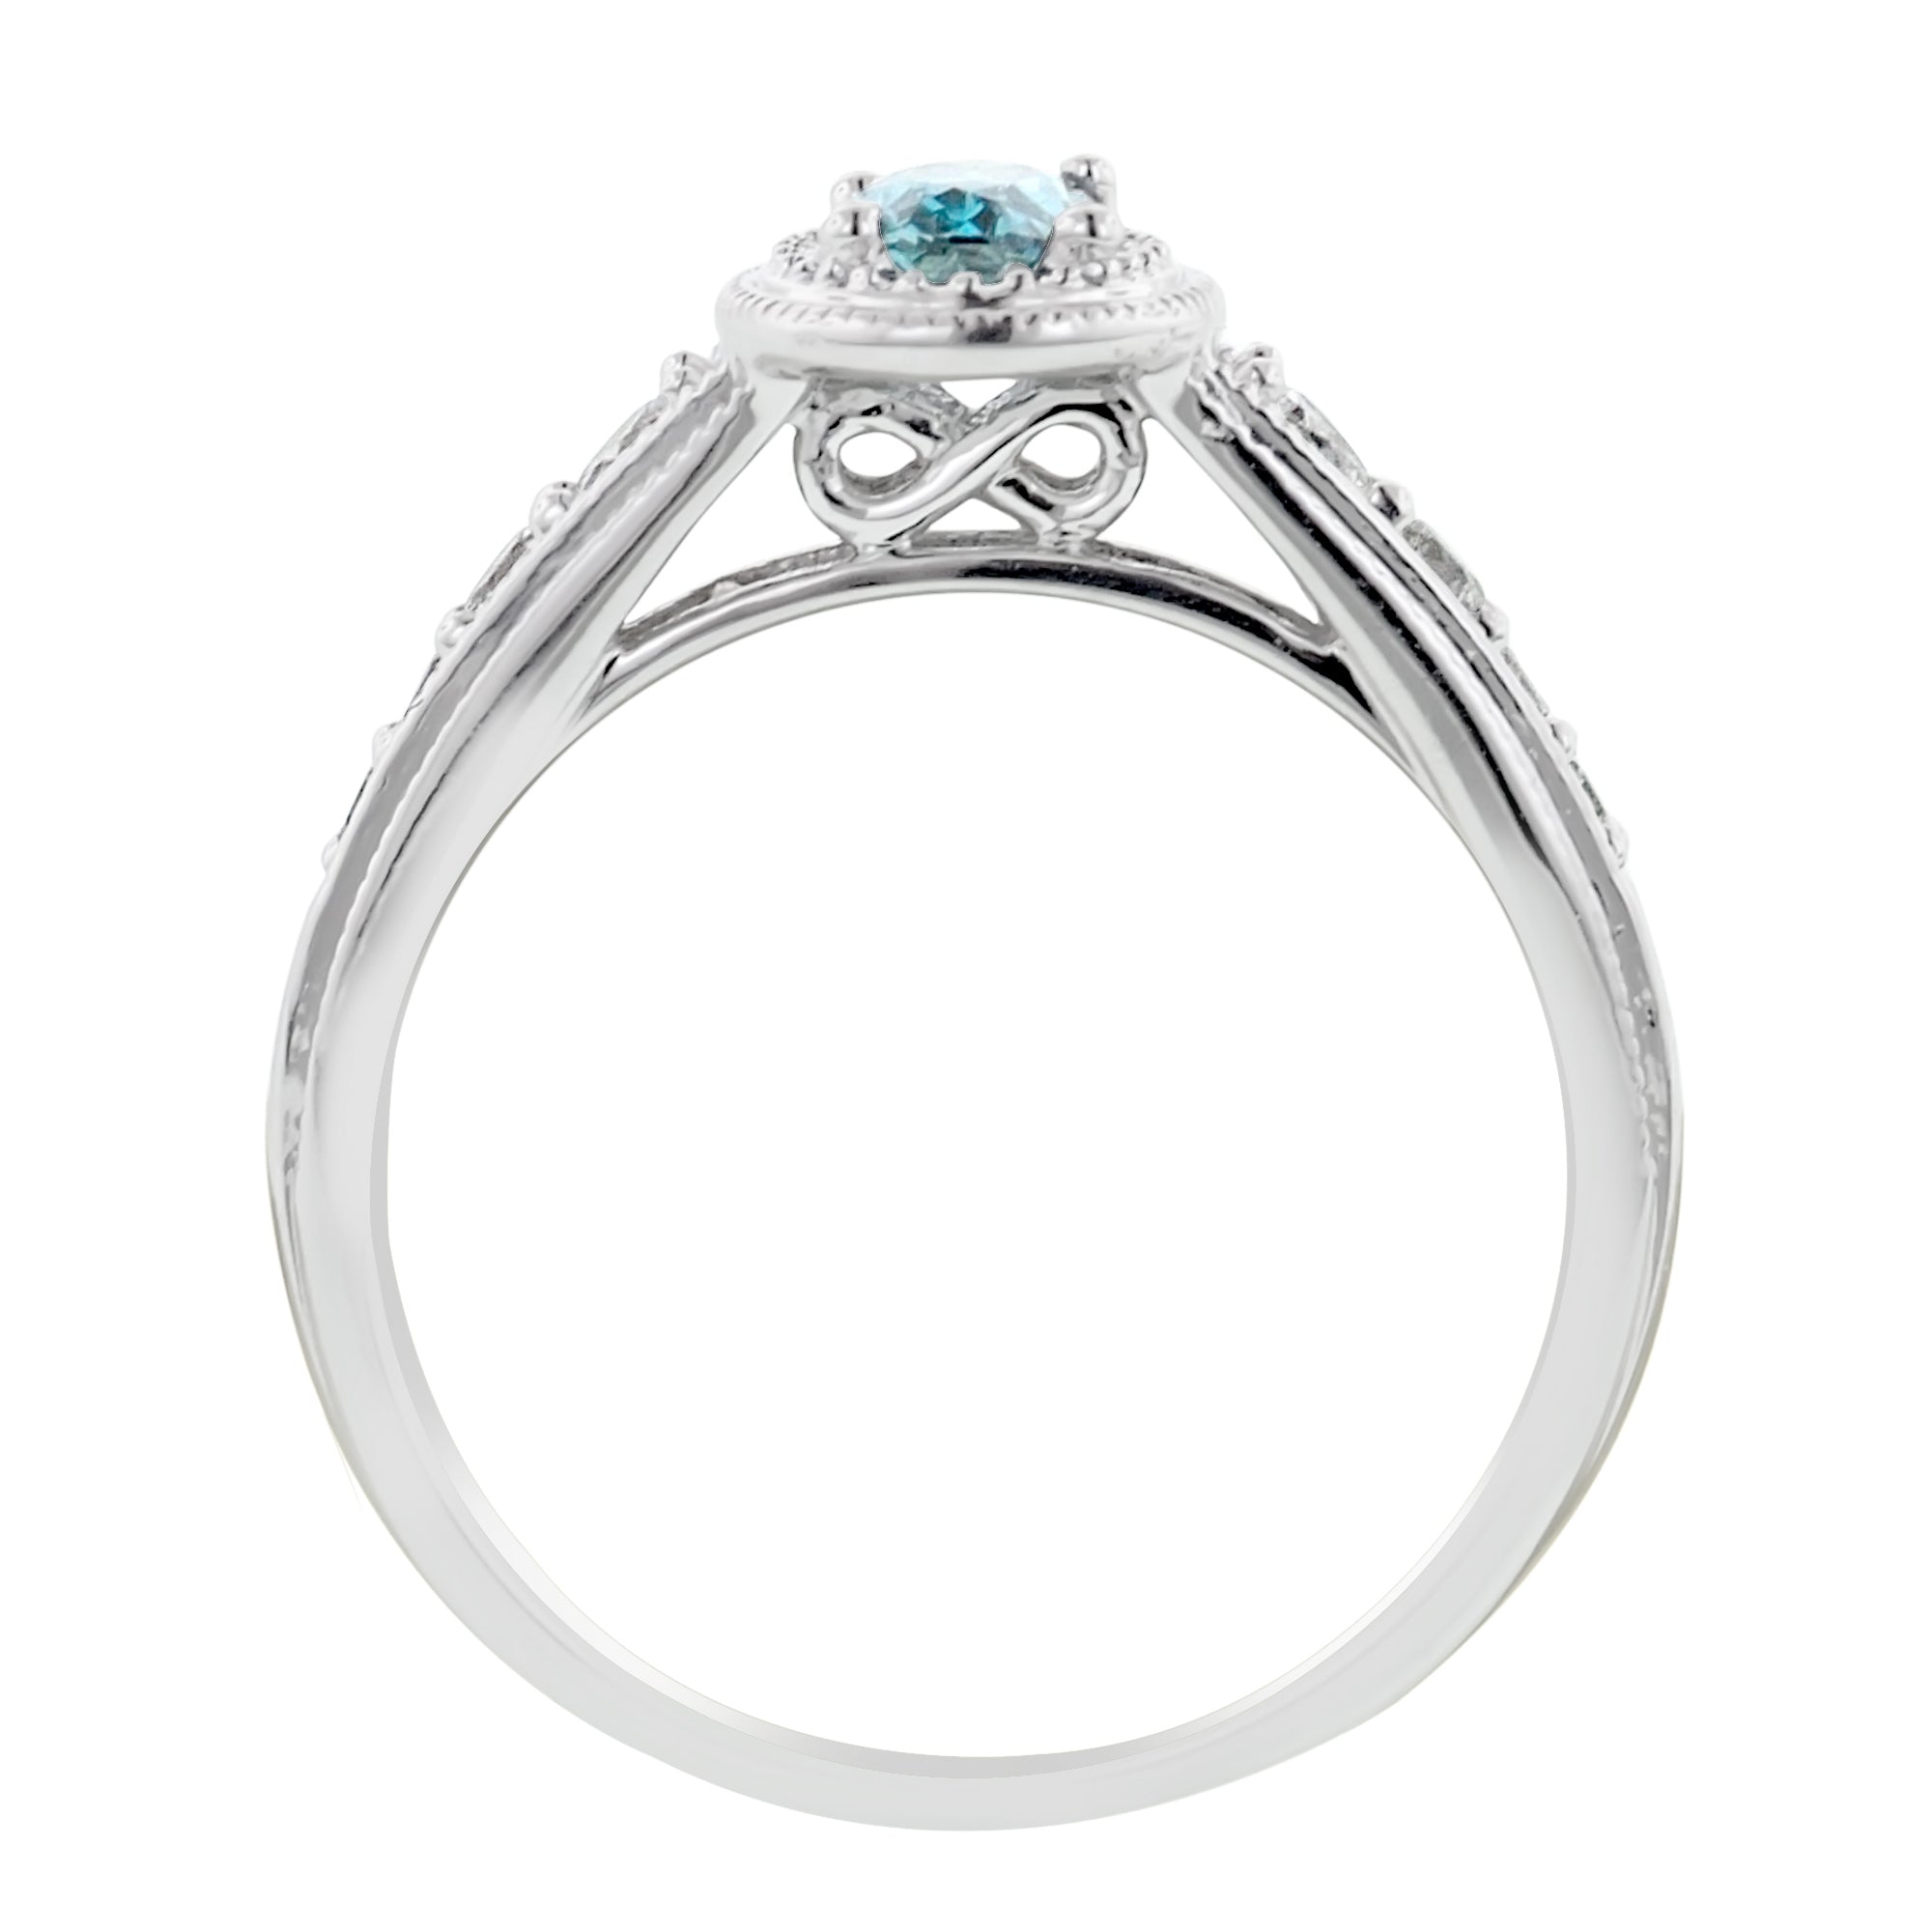 Oval Blue Diamond Engagement Ring in 14kt White Gold (3/4ct tw)